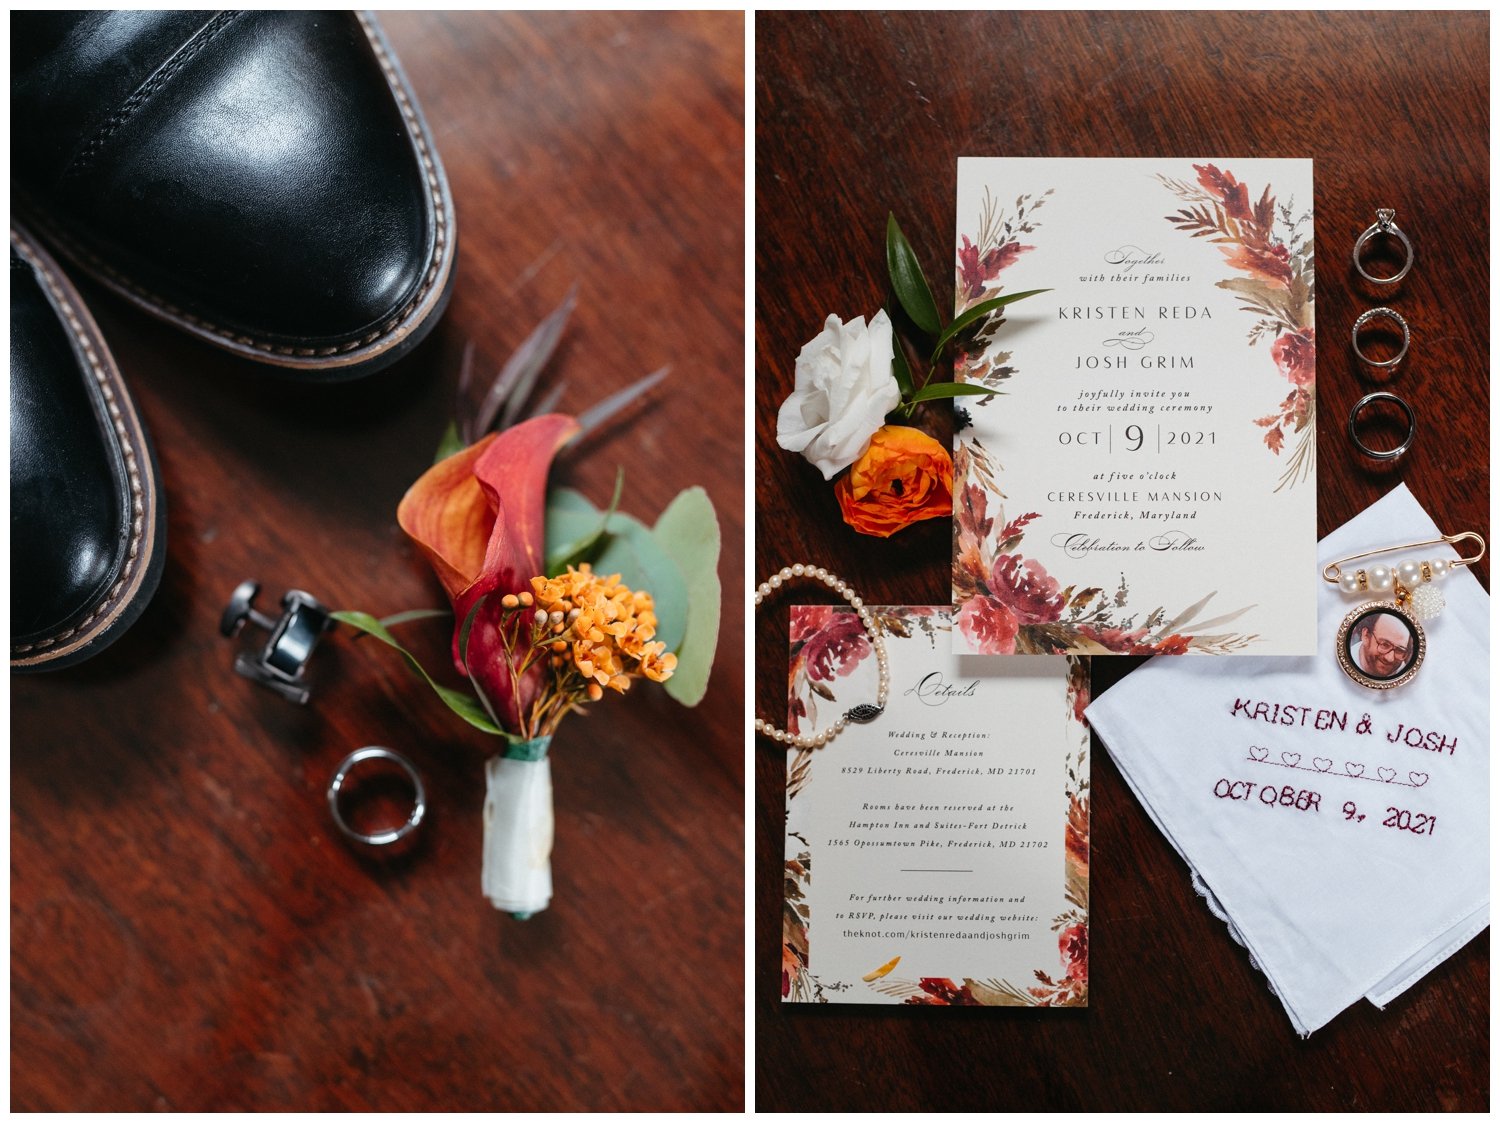 Invitation suite and boutonnière in bright reds and oranges for the intimate destination wedding